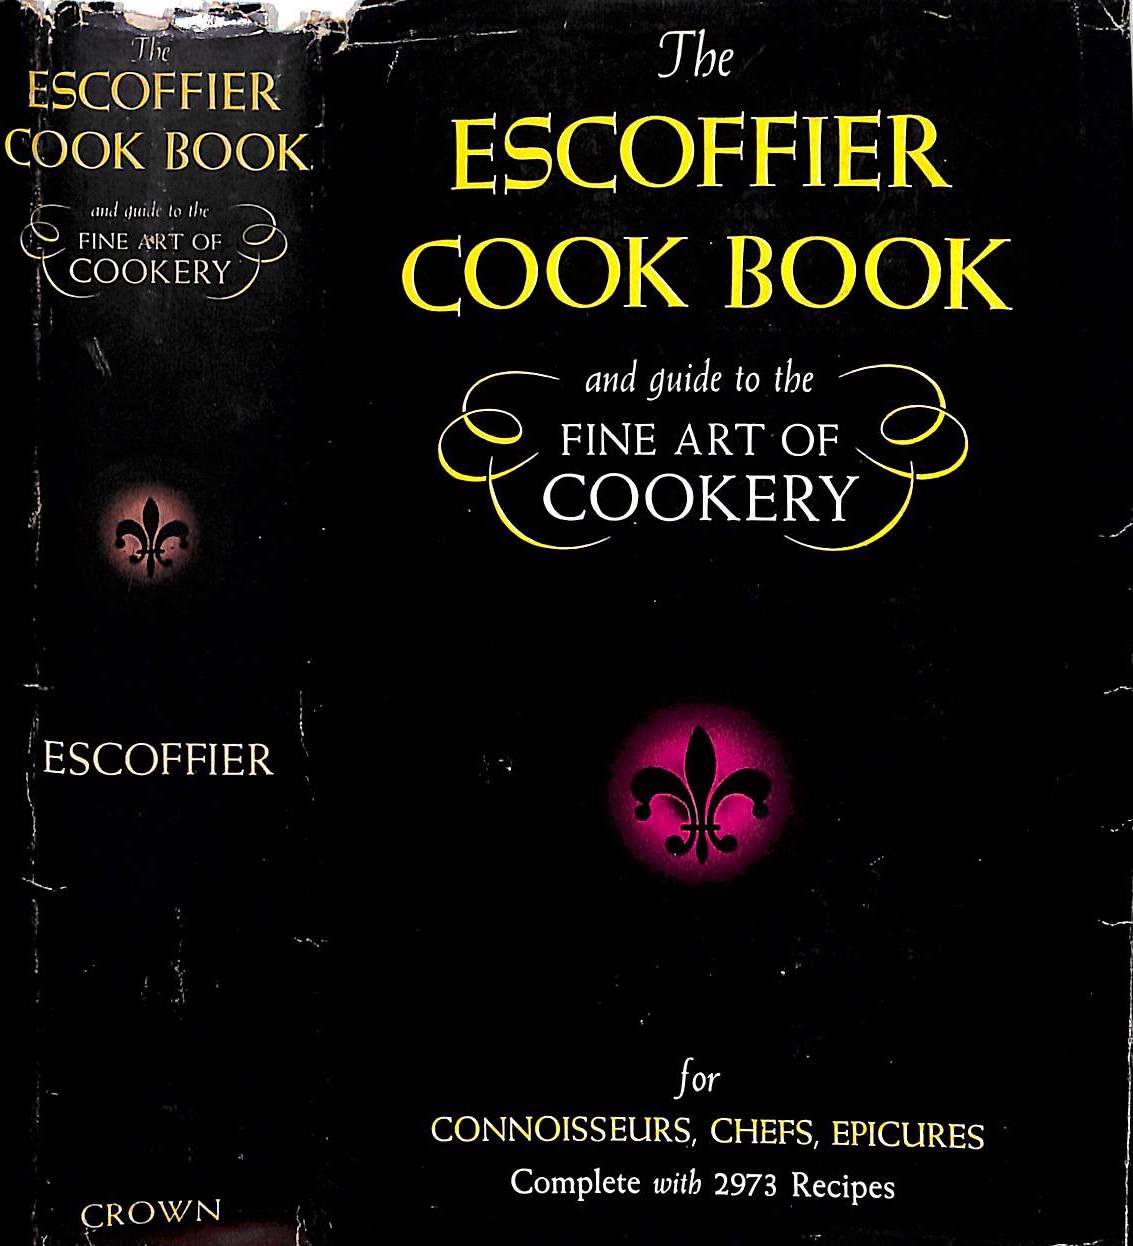 "The Escoffier Cook Book: A Guide To The Fine Art Of Cookery" 1953 ESCOFFIER, A.